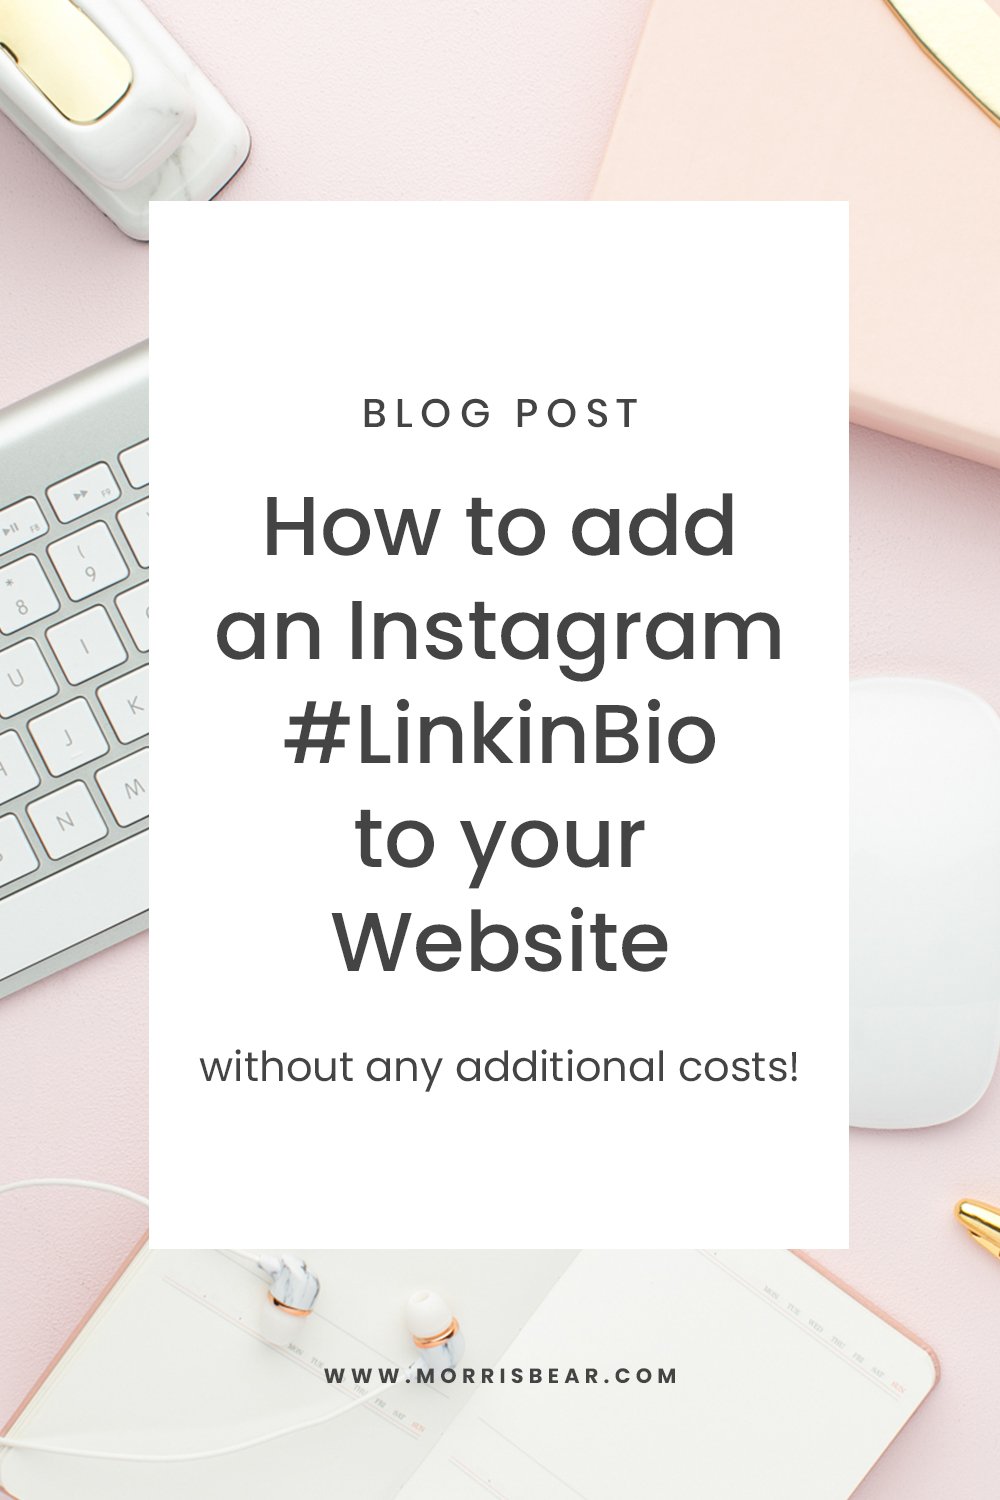 Free Alternative to Linktree - How to add an Instagram LinkTree to your Website for Free!